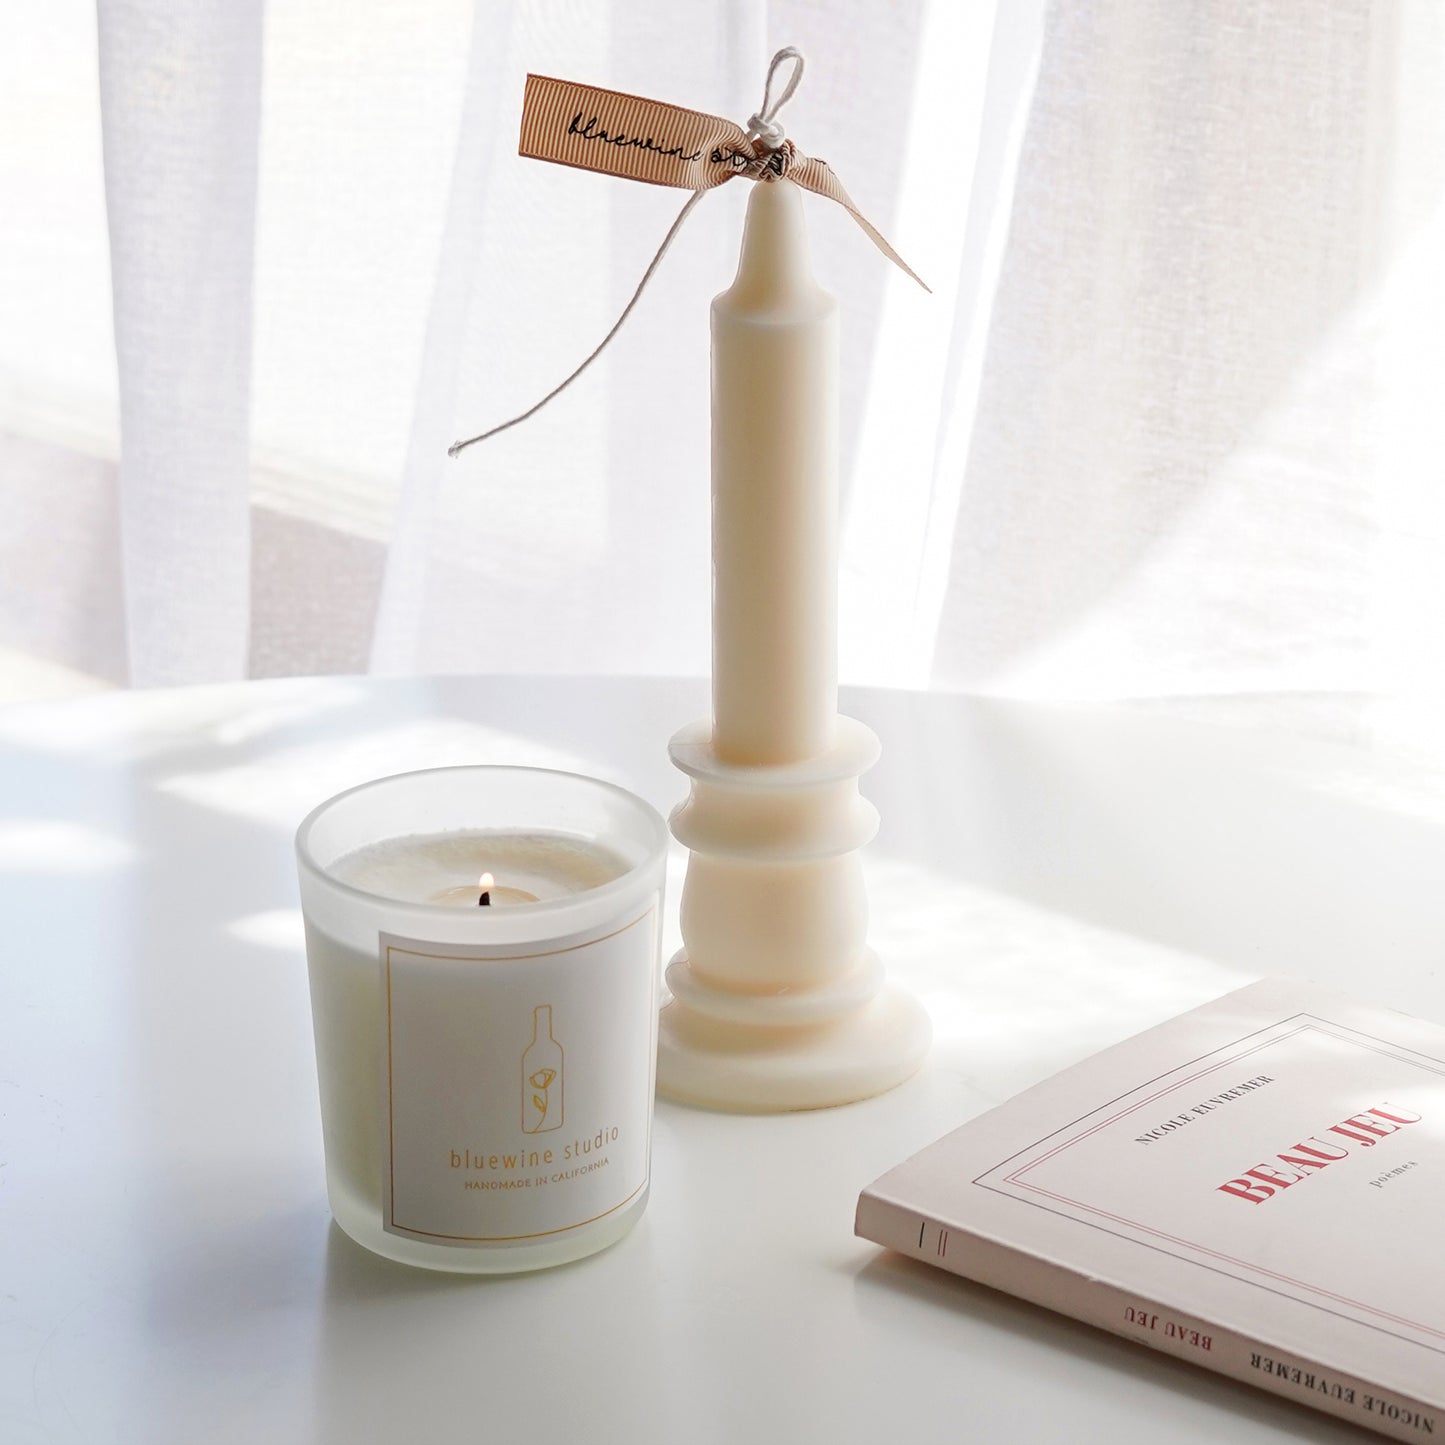 bluewine studio lit 5oz frosted glass container candle, a white candlestick shape candle with a beige ribbon, and french book Beau Jeu on the white round table